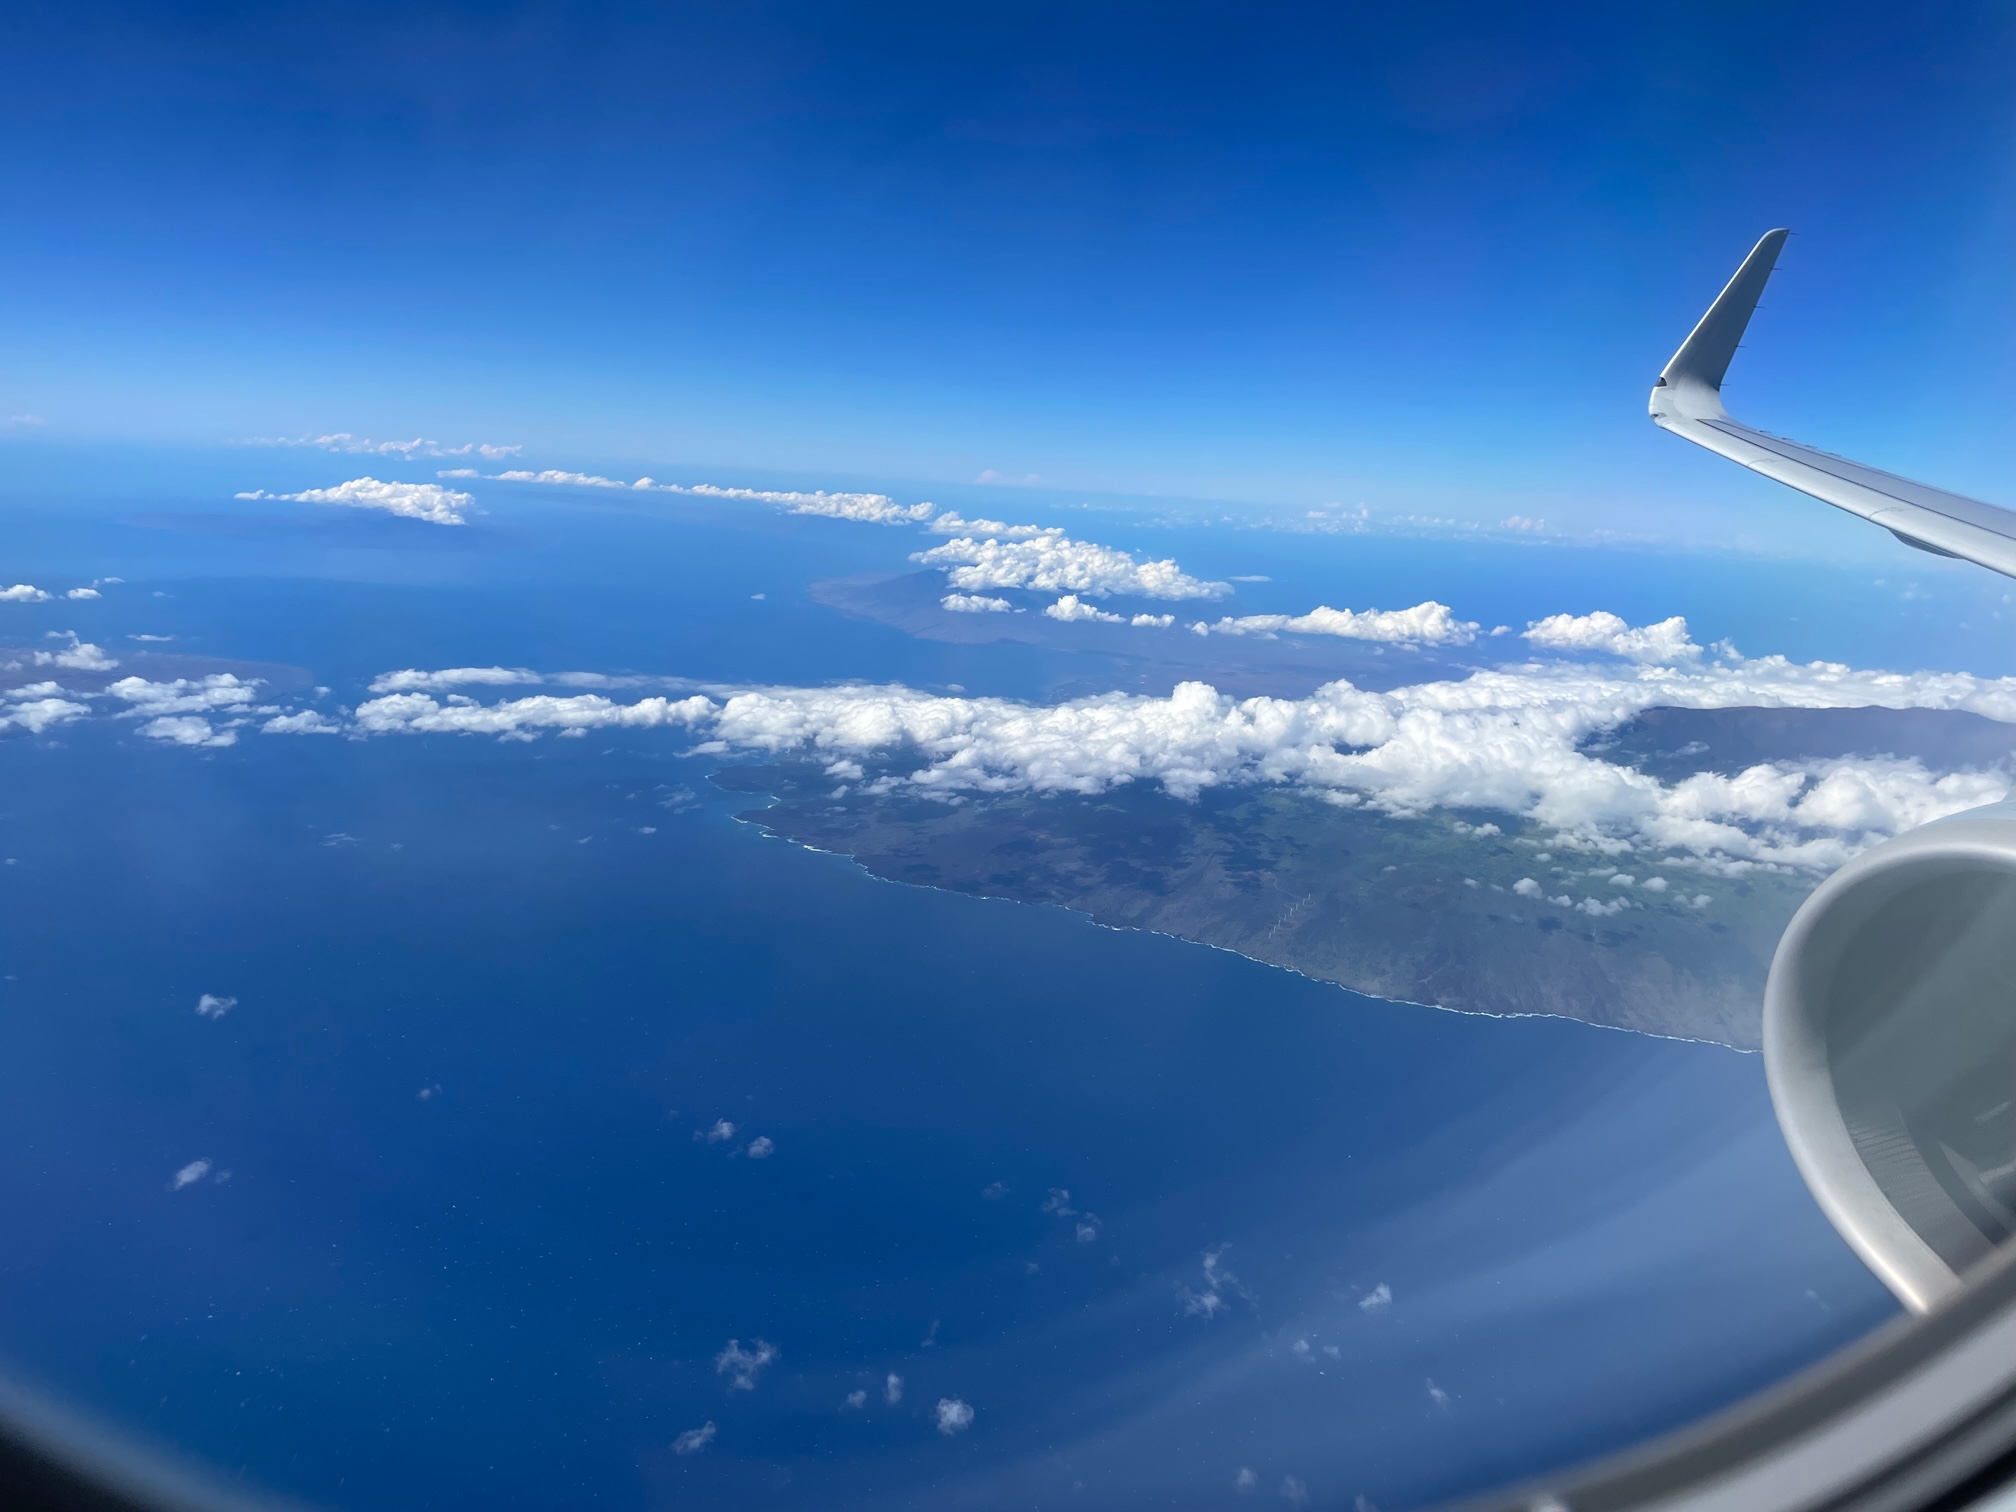 View of Hawaii from the airplane. Wing is visible and island below.